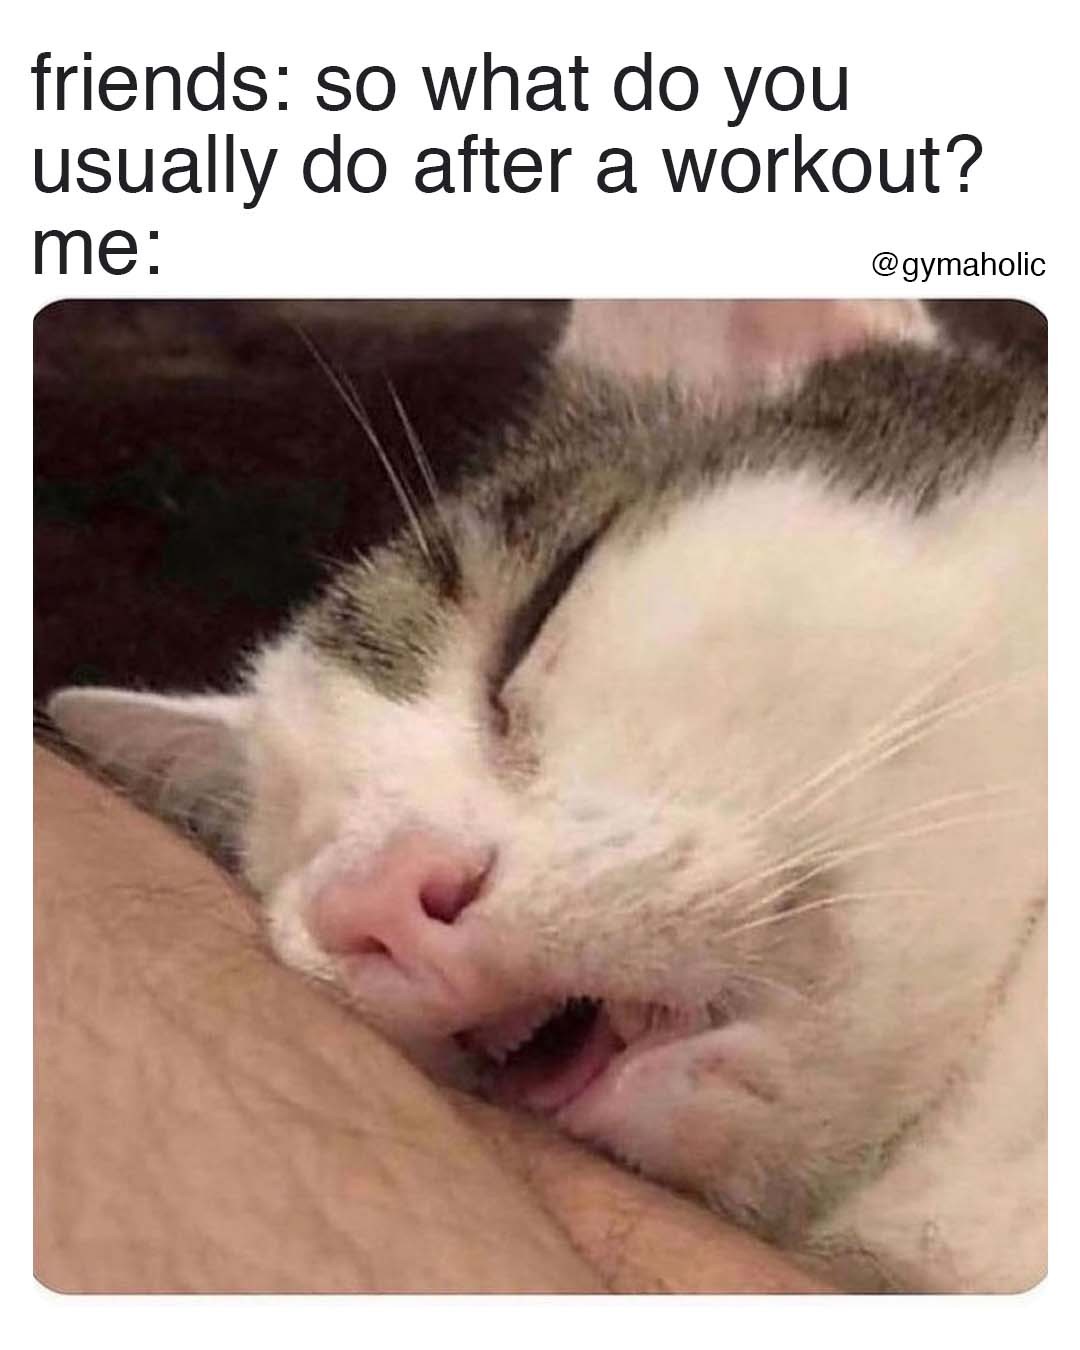 friends: so what do you usually do after a workout?